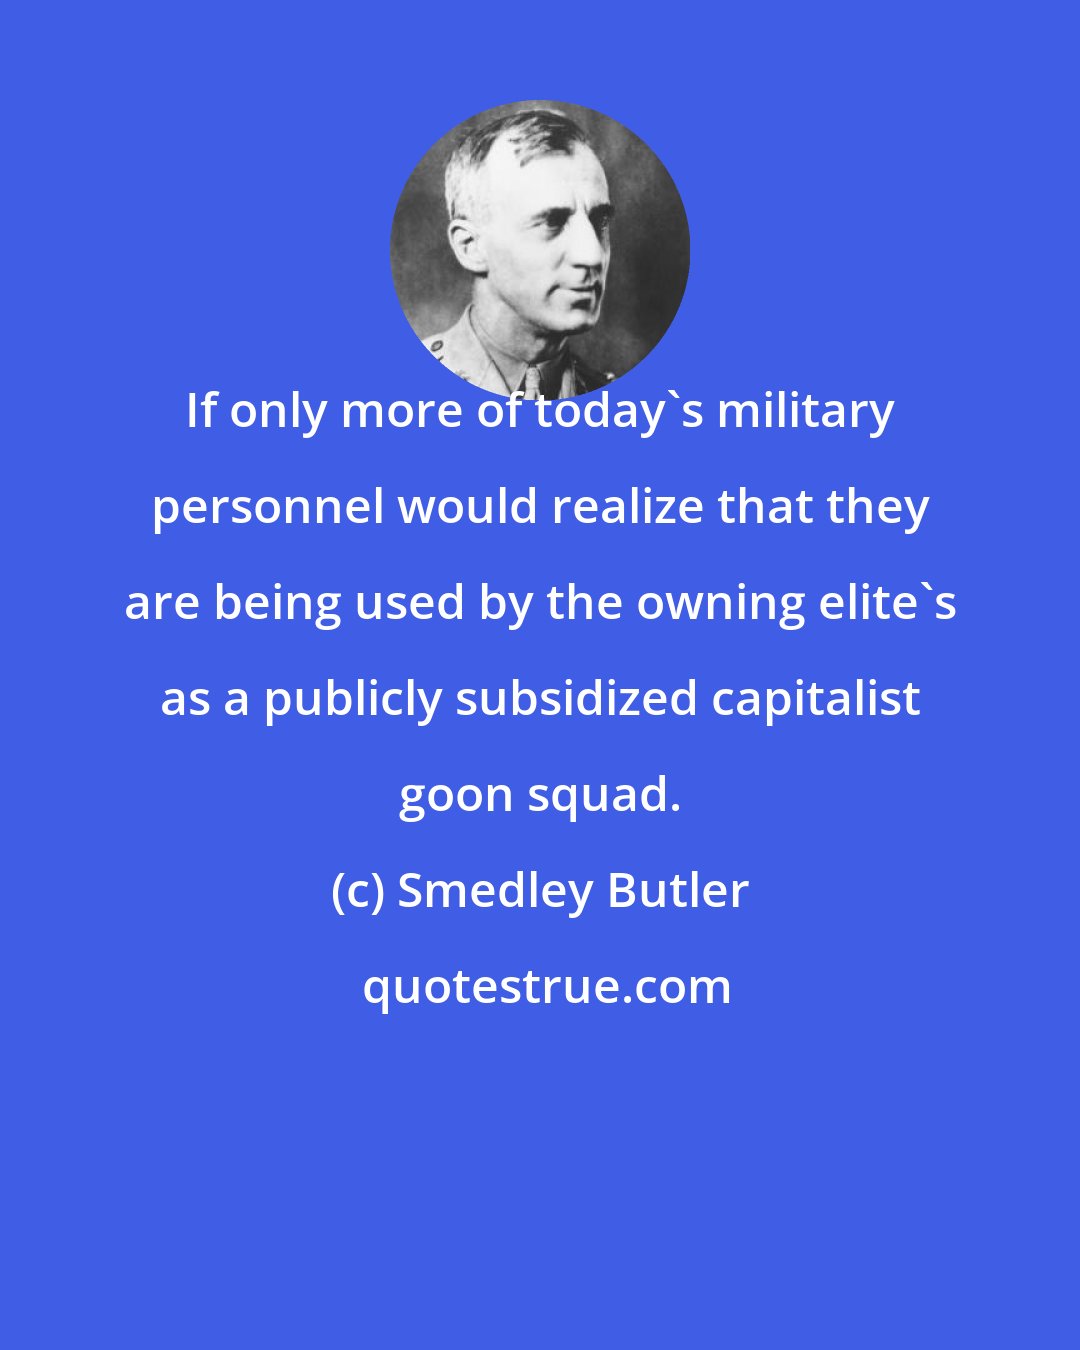 Smedley Butler: If only more of today's military personnel would realize that they are being used by the owning elite's as a publicly subsidized capitalist goon squad.